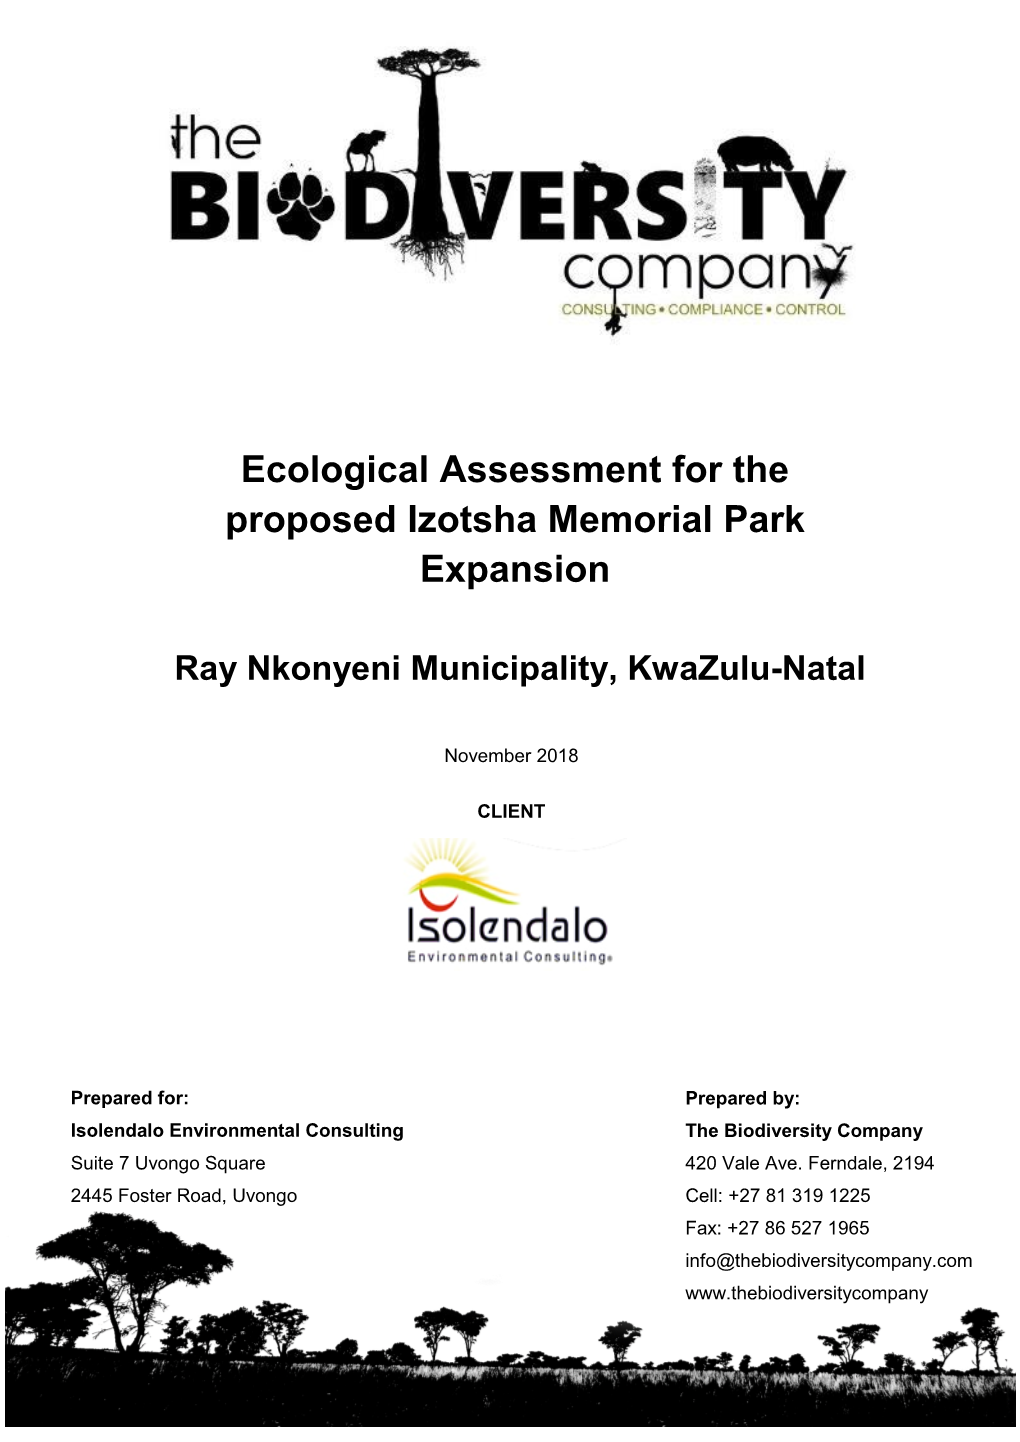 Ecological Assessment for the Proposed Izotsha Memorial Park